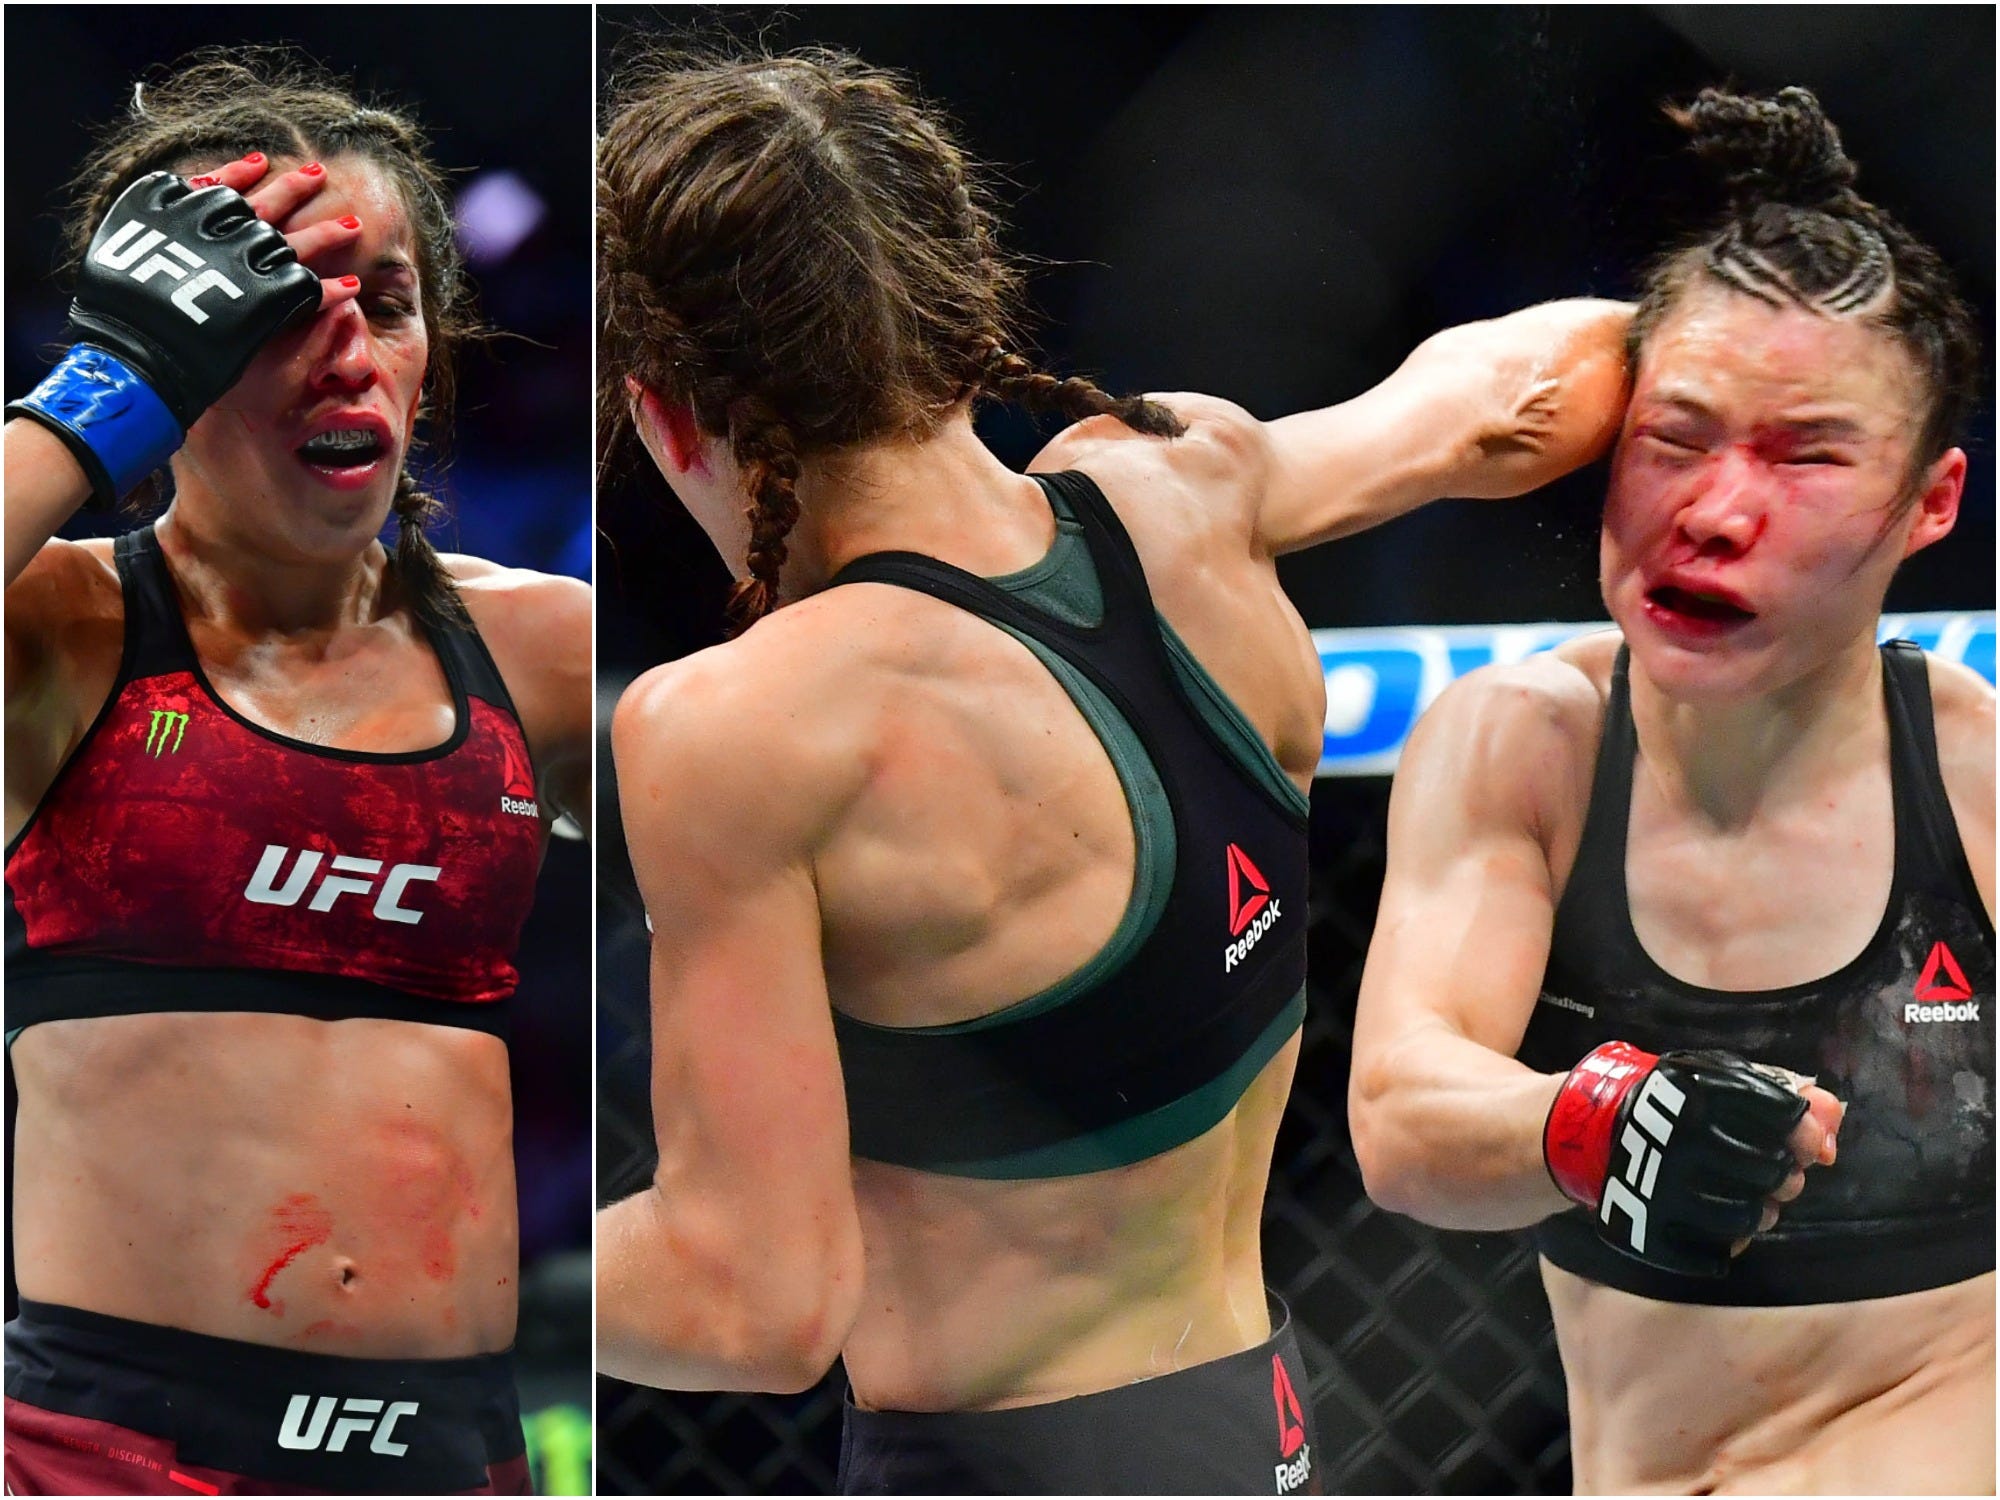 The UFC gave Weili Zhang and Joanna Jedrzejczyk 2-month medical